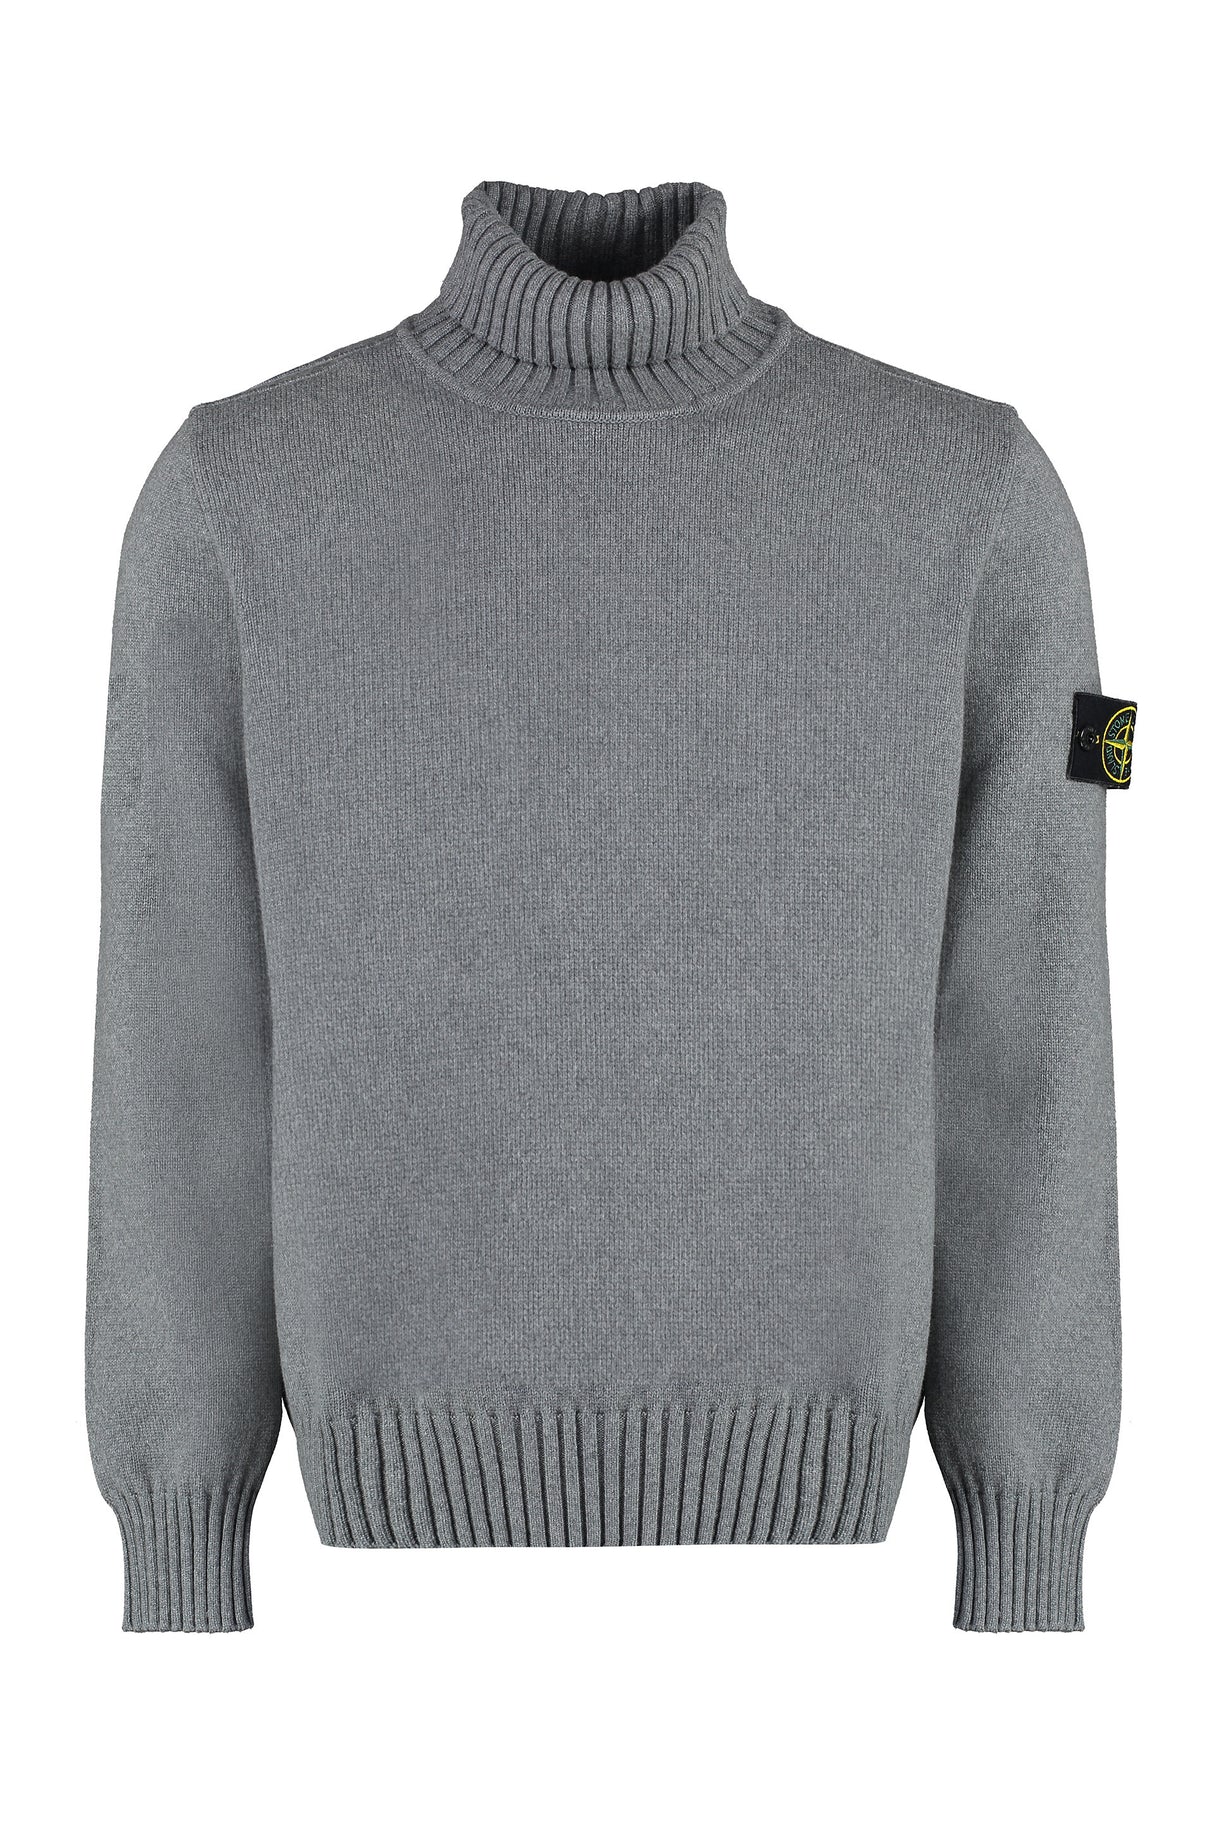 STONE ISLAND Men's Grey Cotton-Blend Sweater with Removable Logo Patch and Ribbed Edges